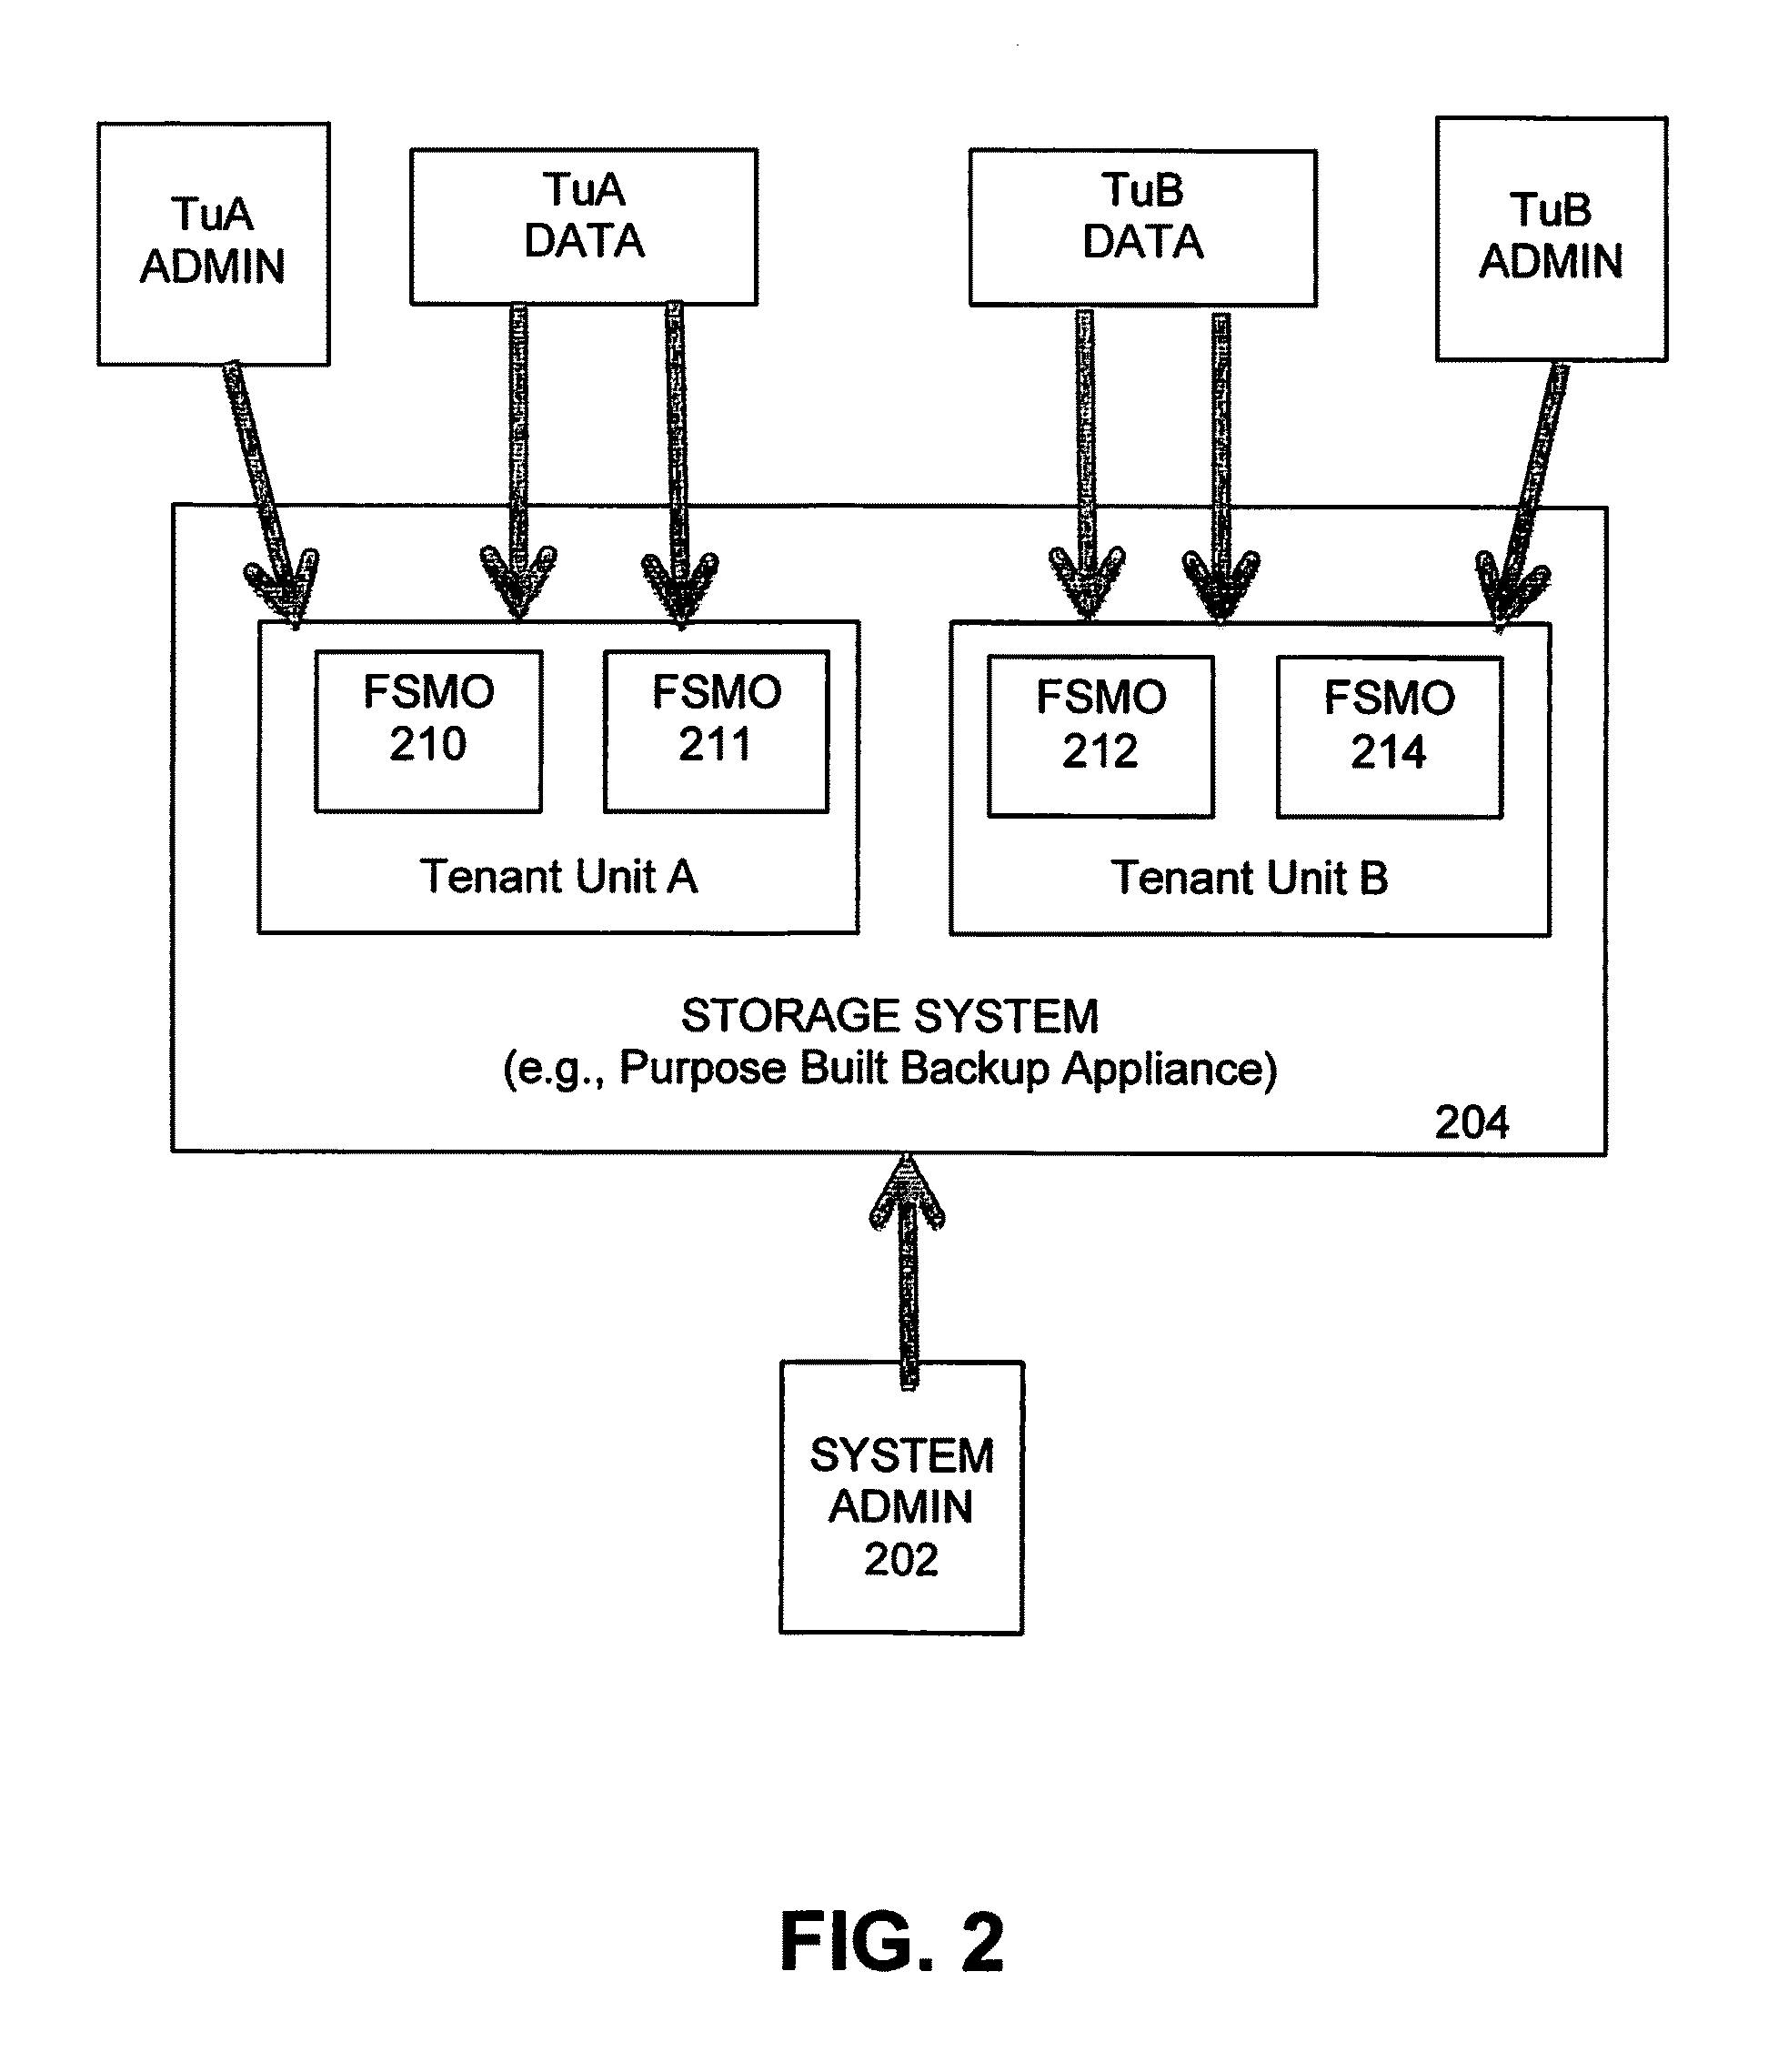 Cache-free and lock-free handling of security information for multiple distributed objects in protection storage systems